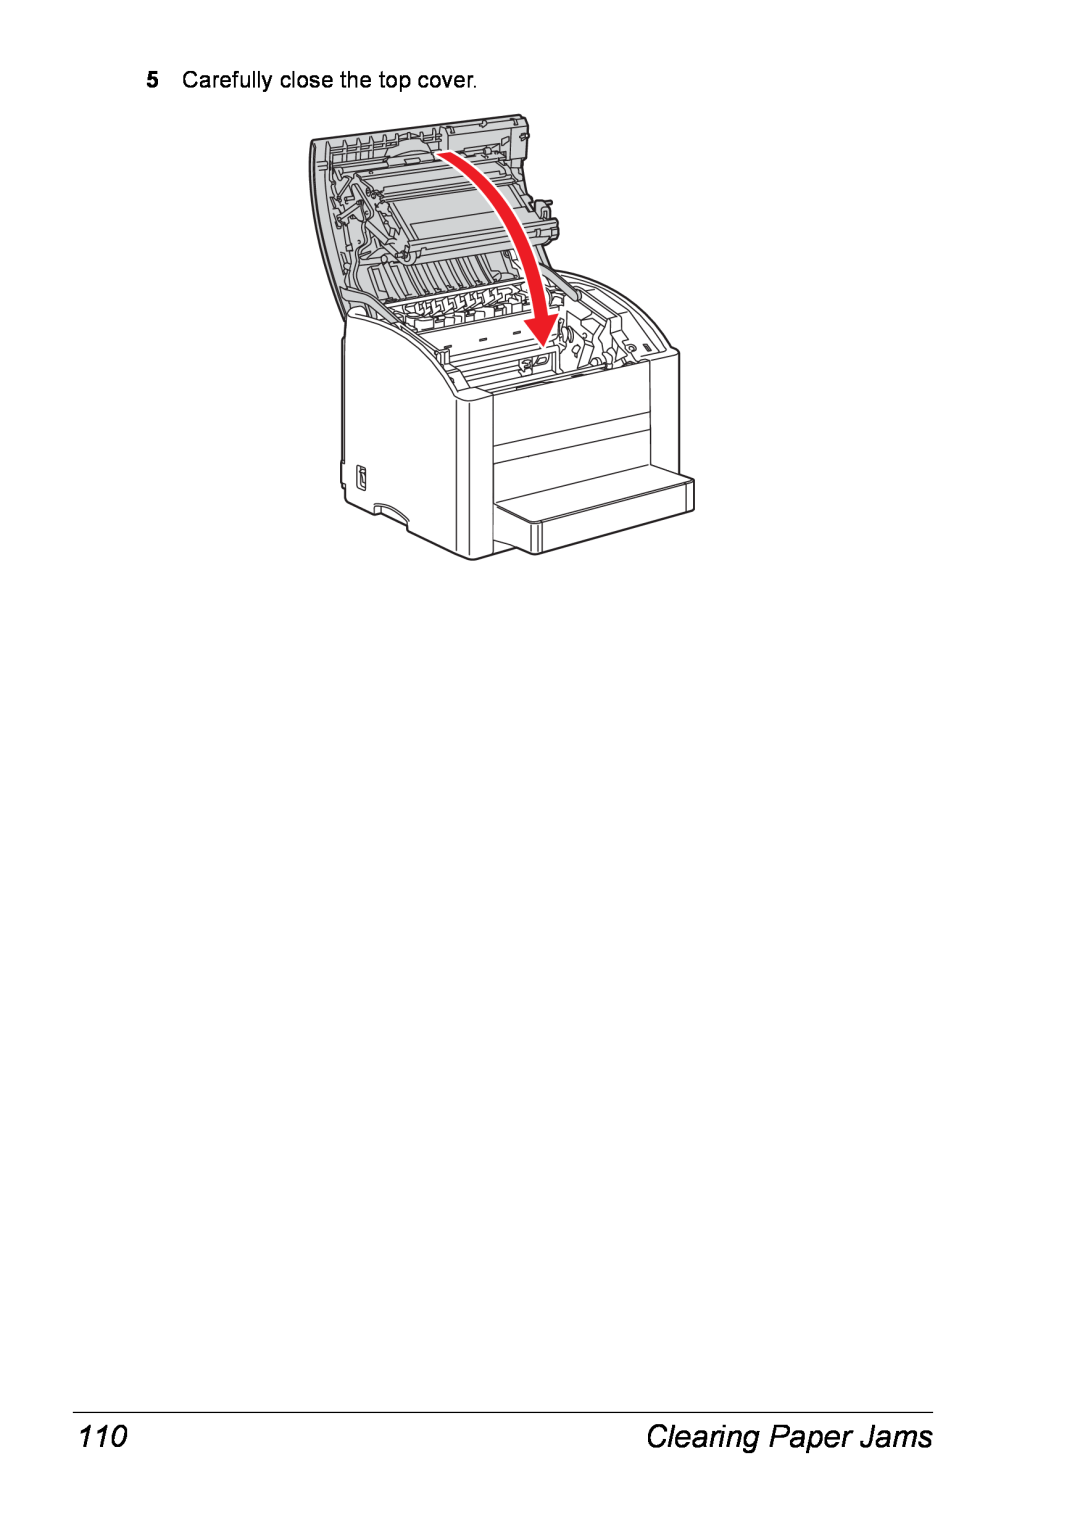 Xerox 6120 manual Clearing Paper Jams, Carefully close the top cover 